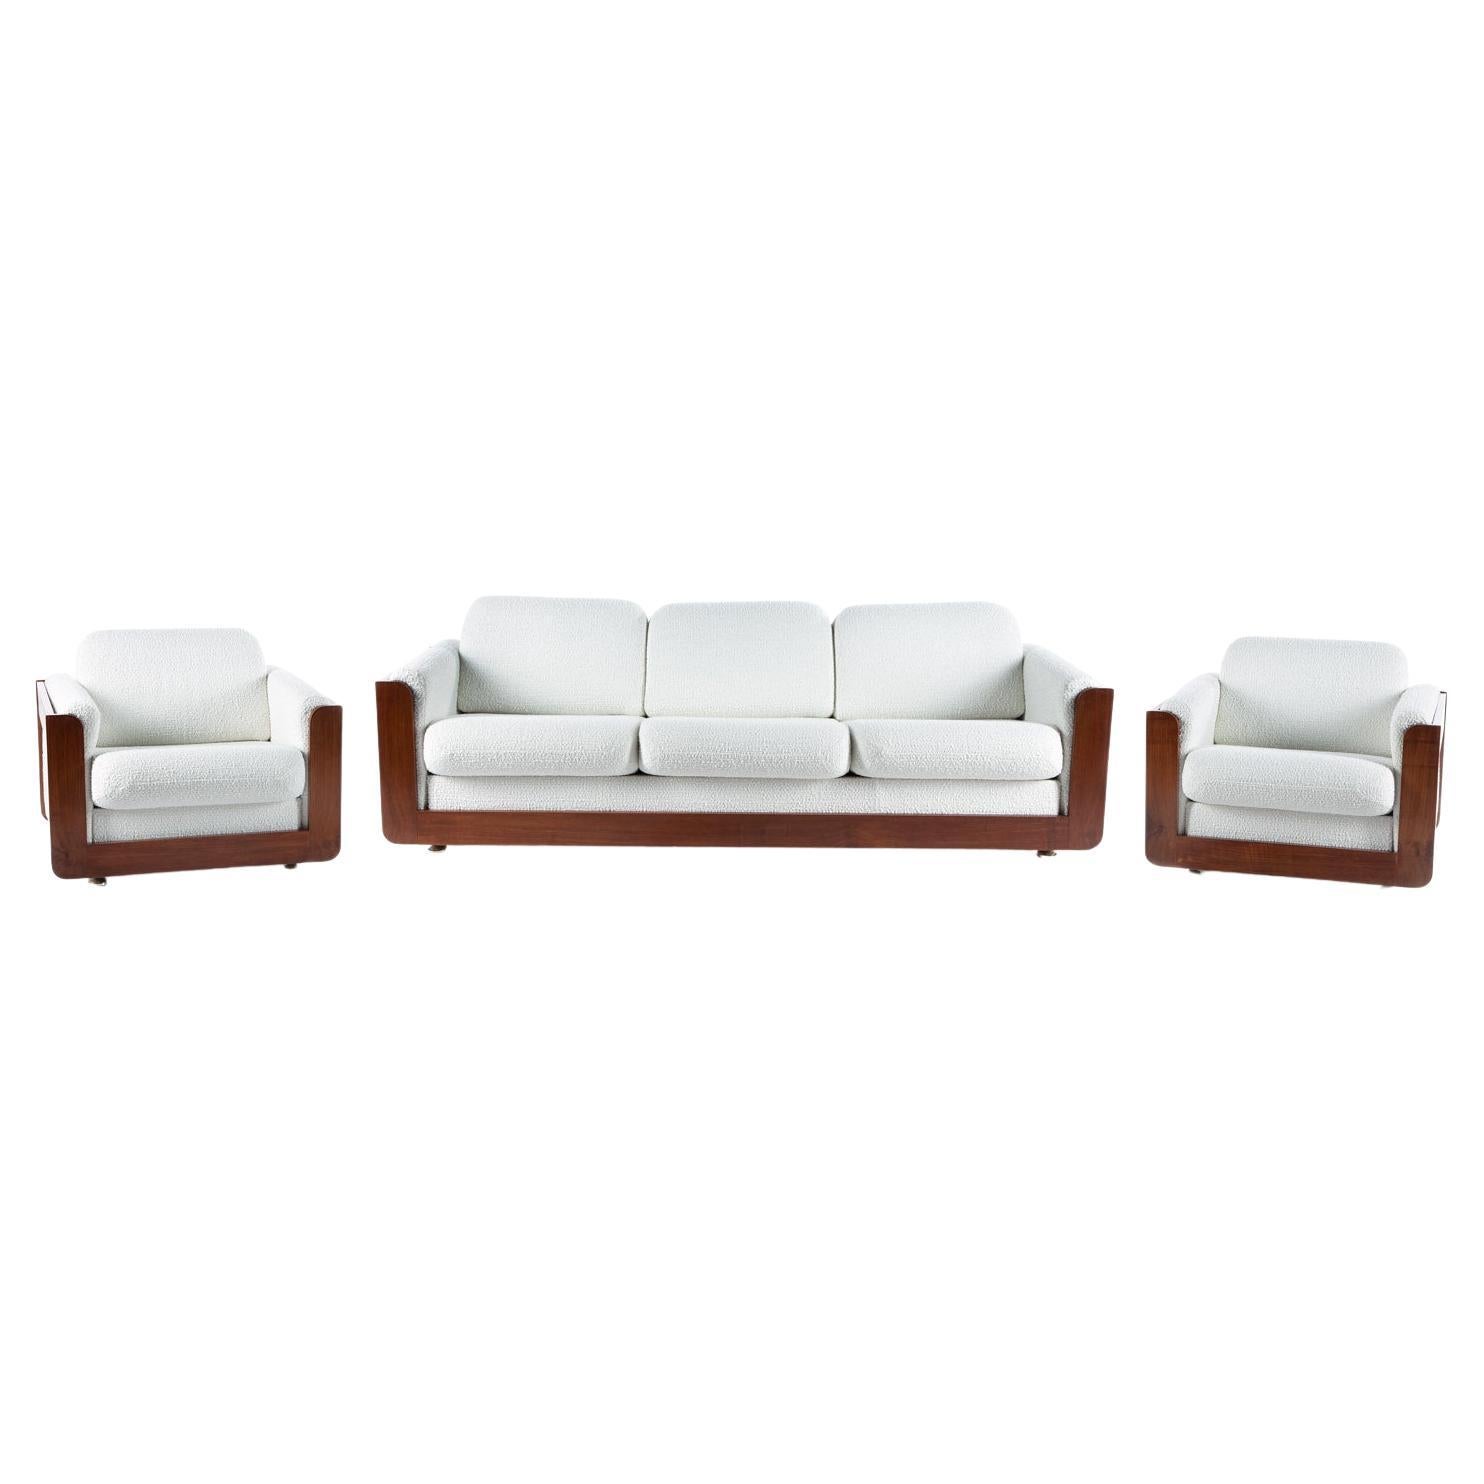 A set of 2 armchairs and one sofa